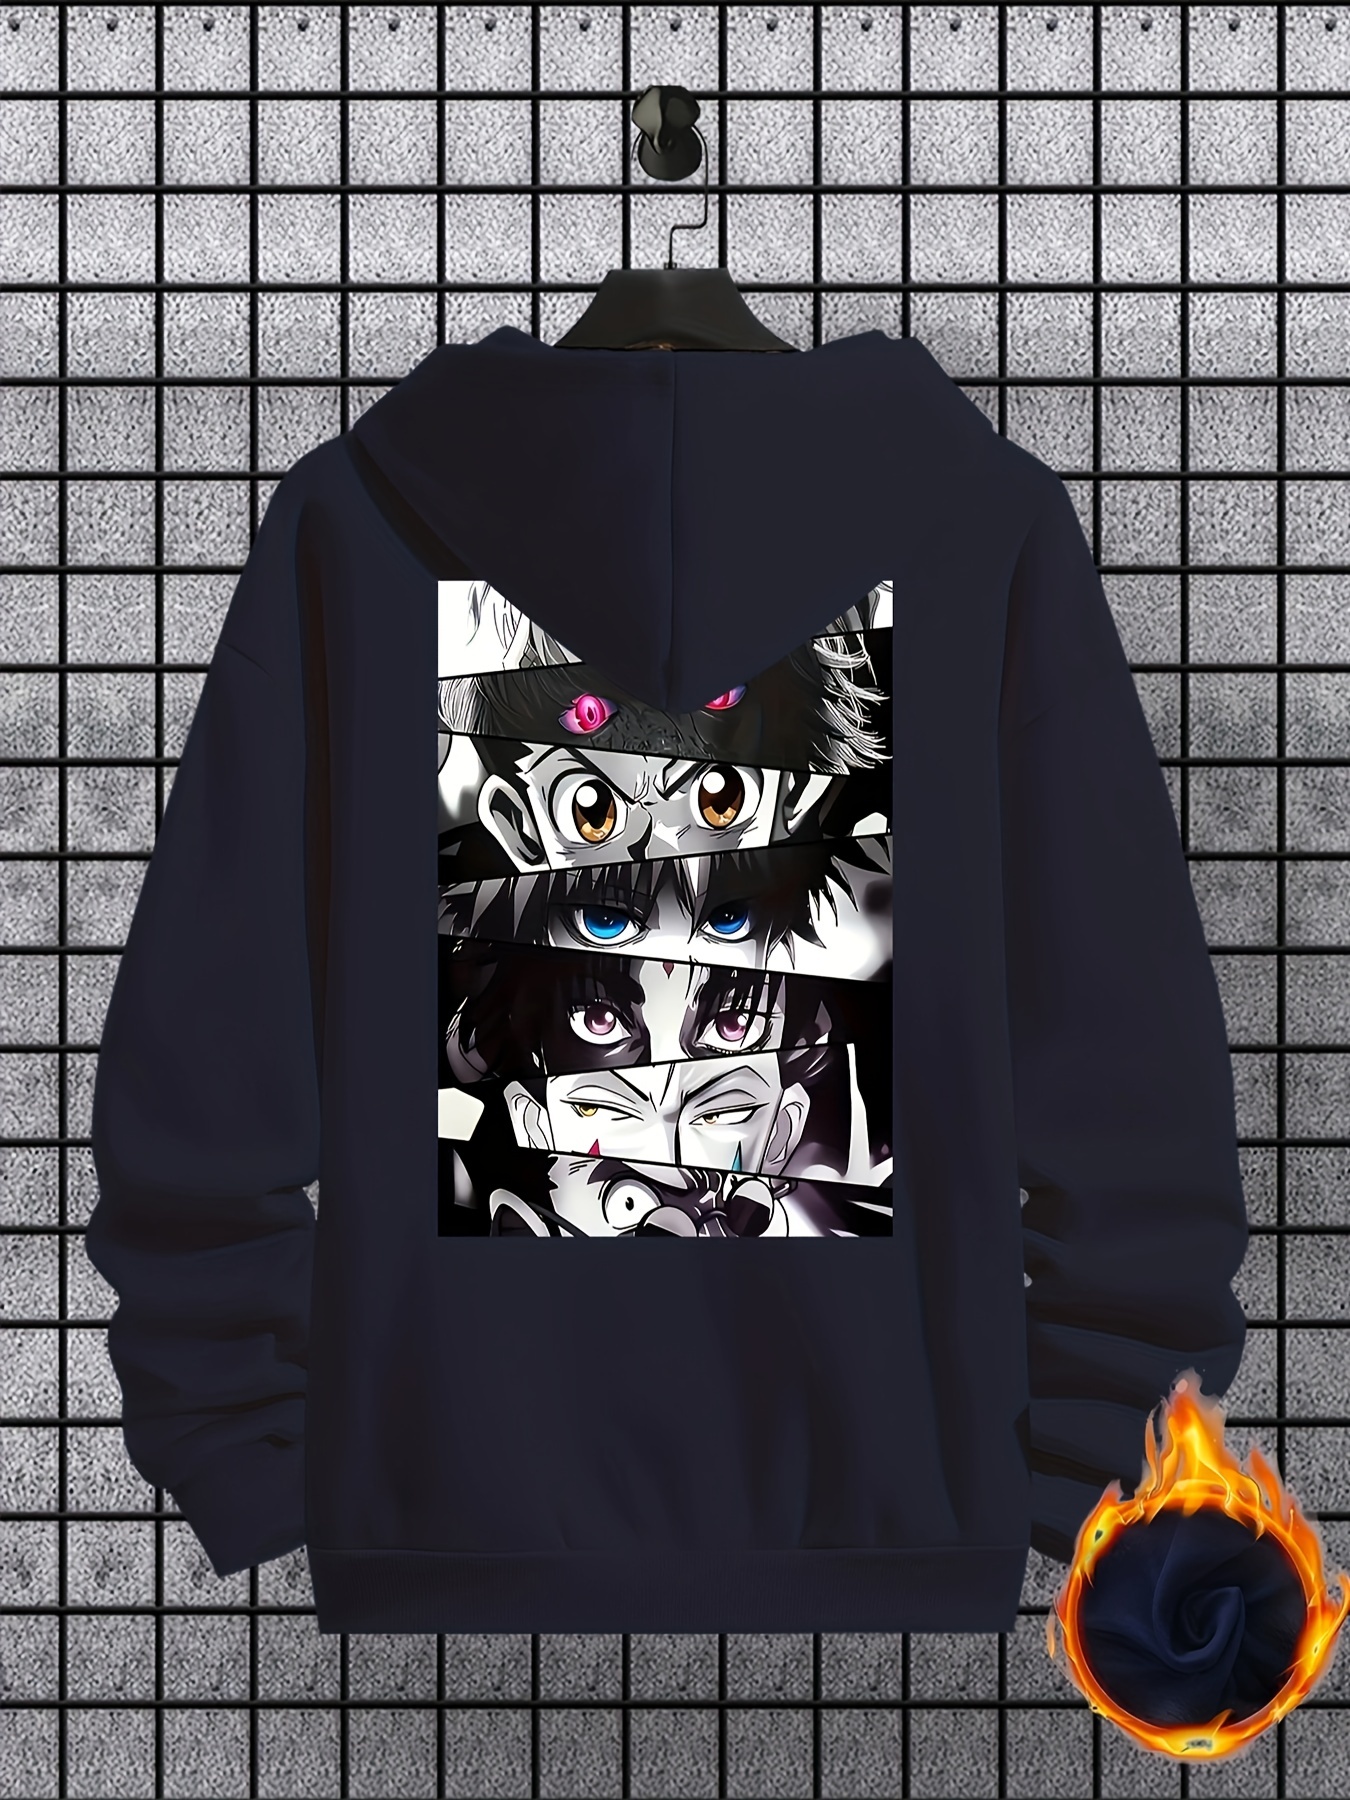 Discover more than 72 anime hoodie black super hot - awesomeenglish.edu.vn